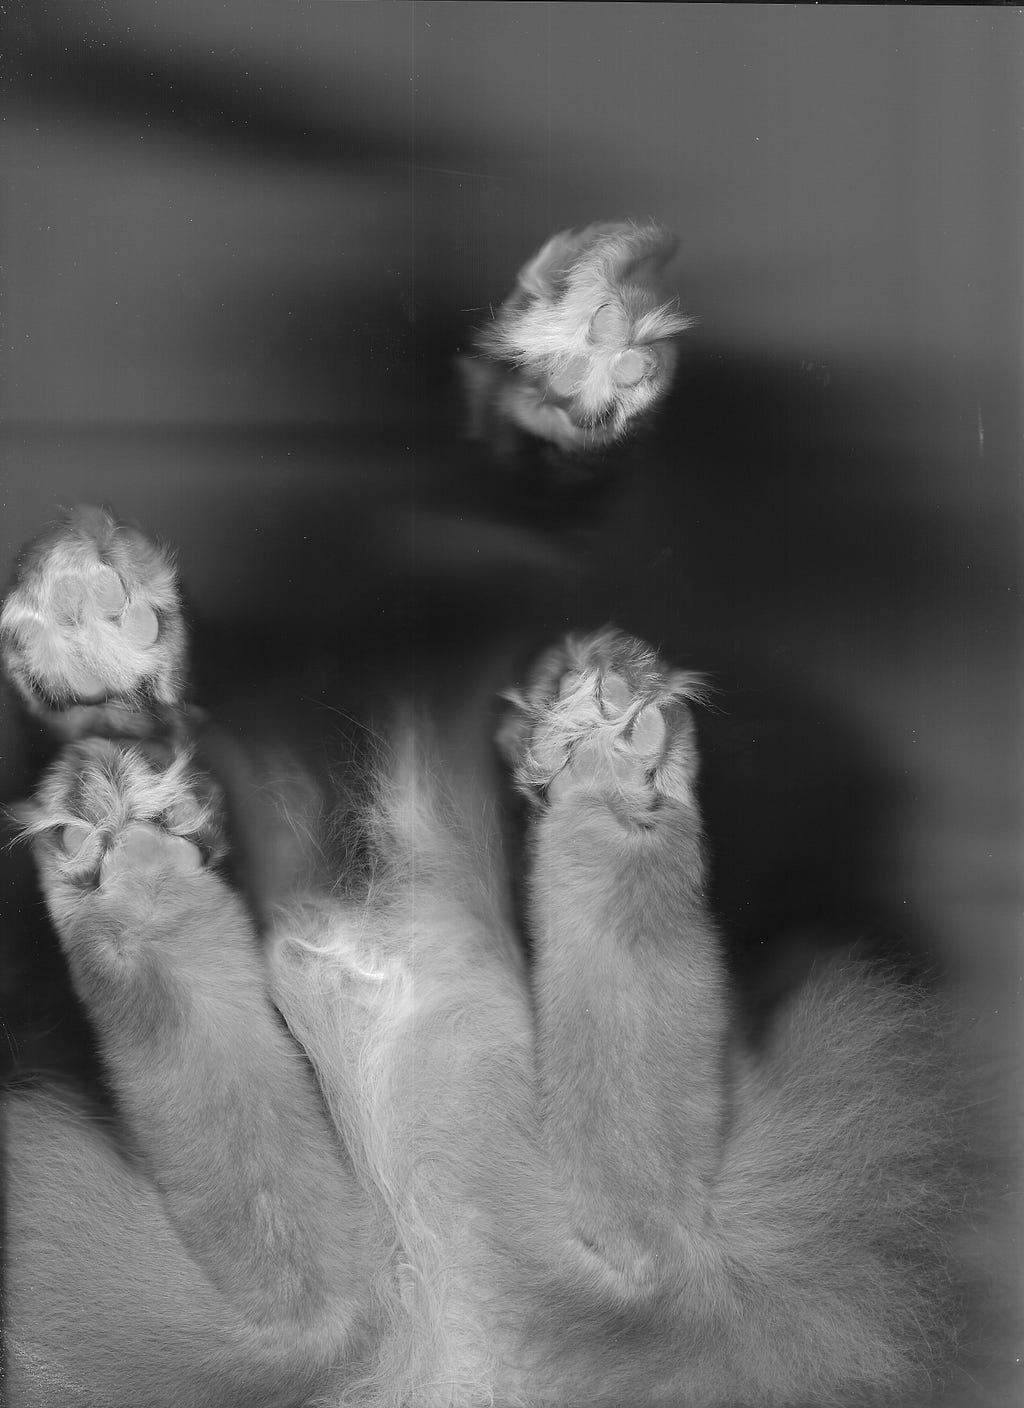 Cat viewed from underneath — four paws and furry butt in black and white.